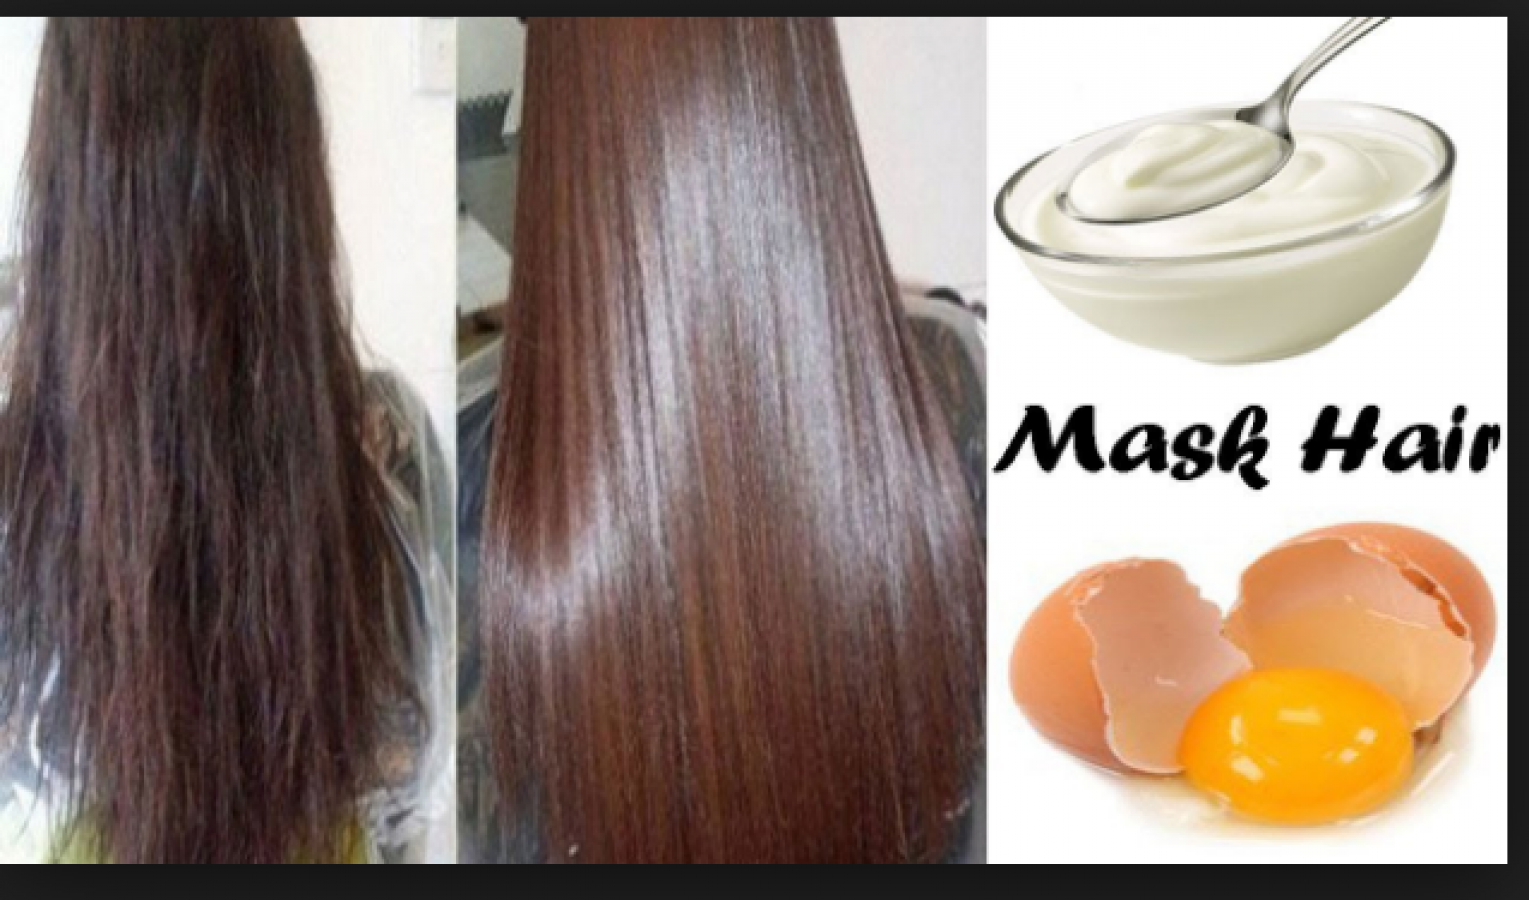 Apply these Egg mask to get healthy and straight hairs | NewsTrack English 1